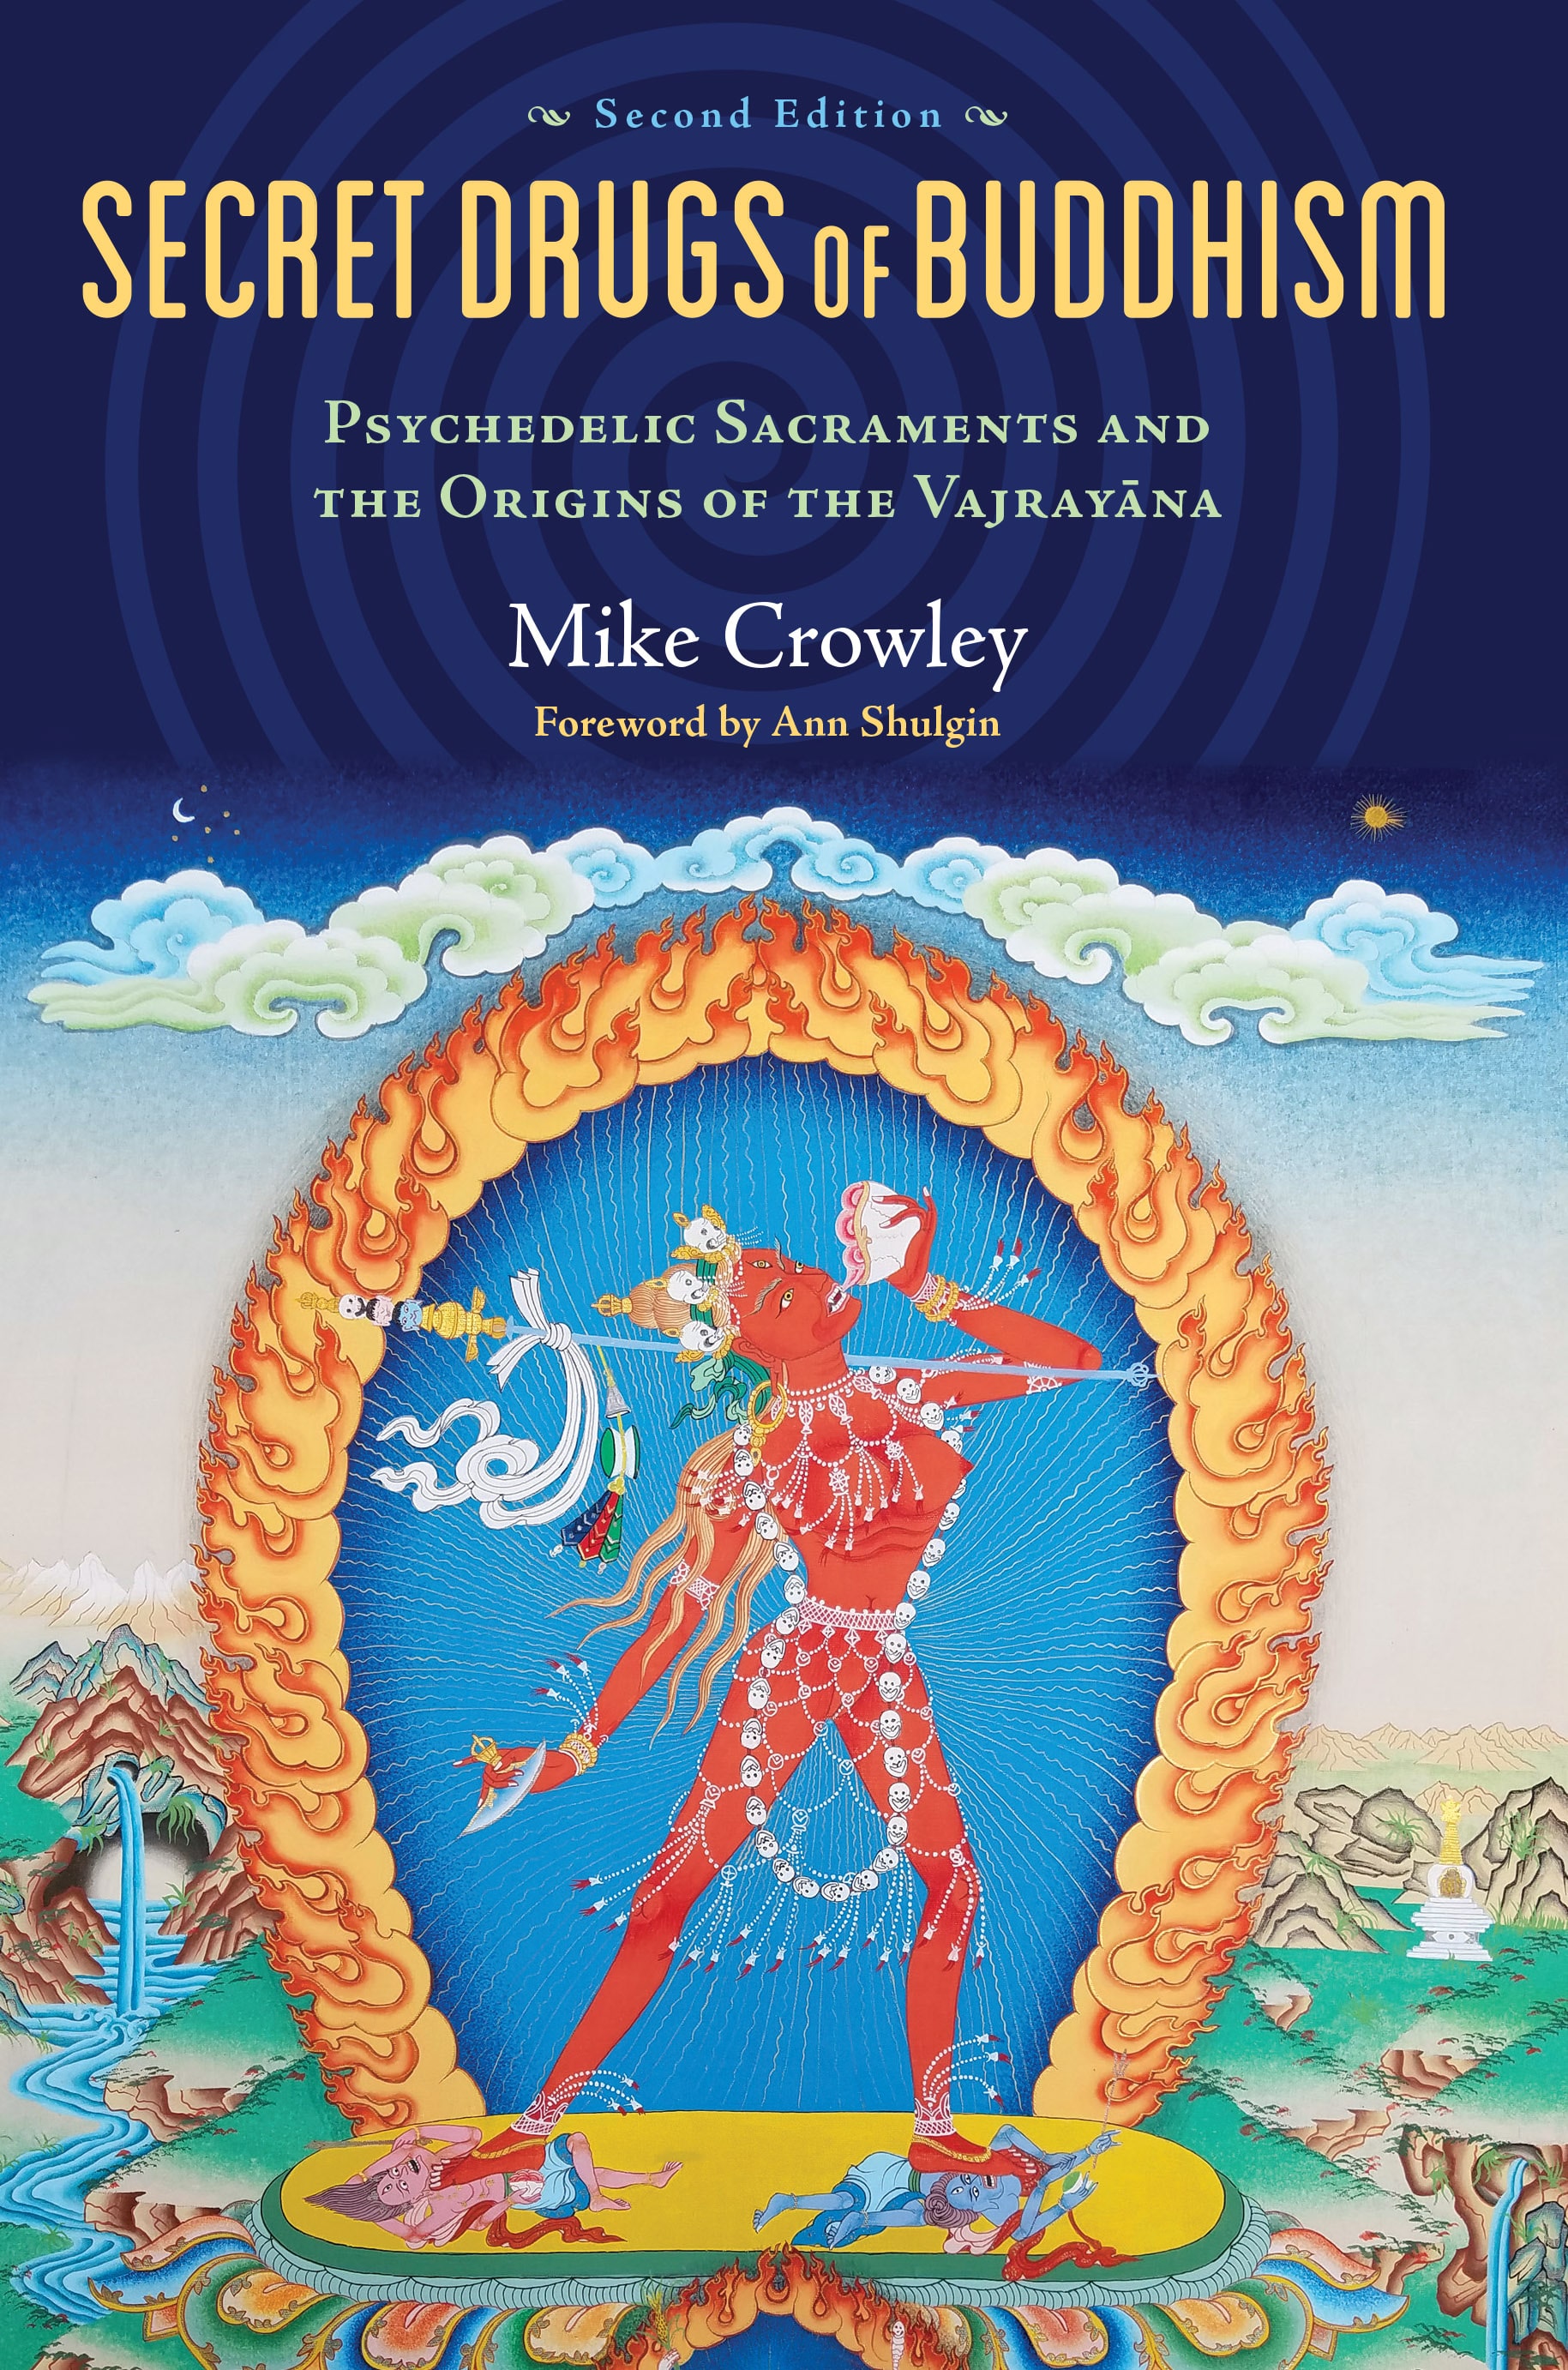 Cover Art of 2nd Edition of Secret Drugs of Buddhism by Michael Crowley 